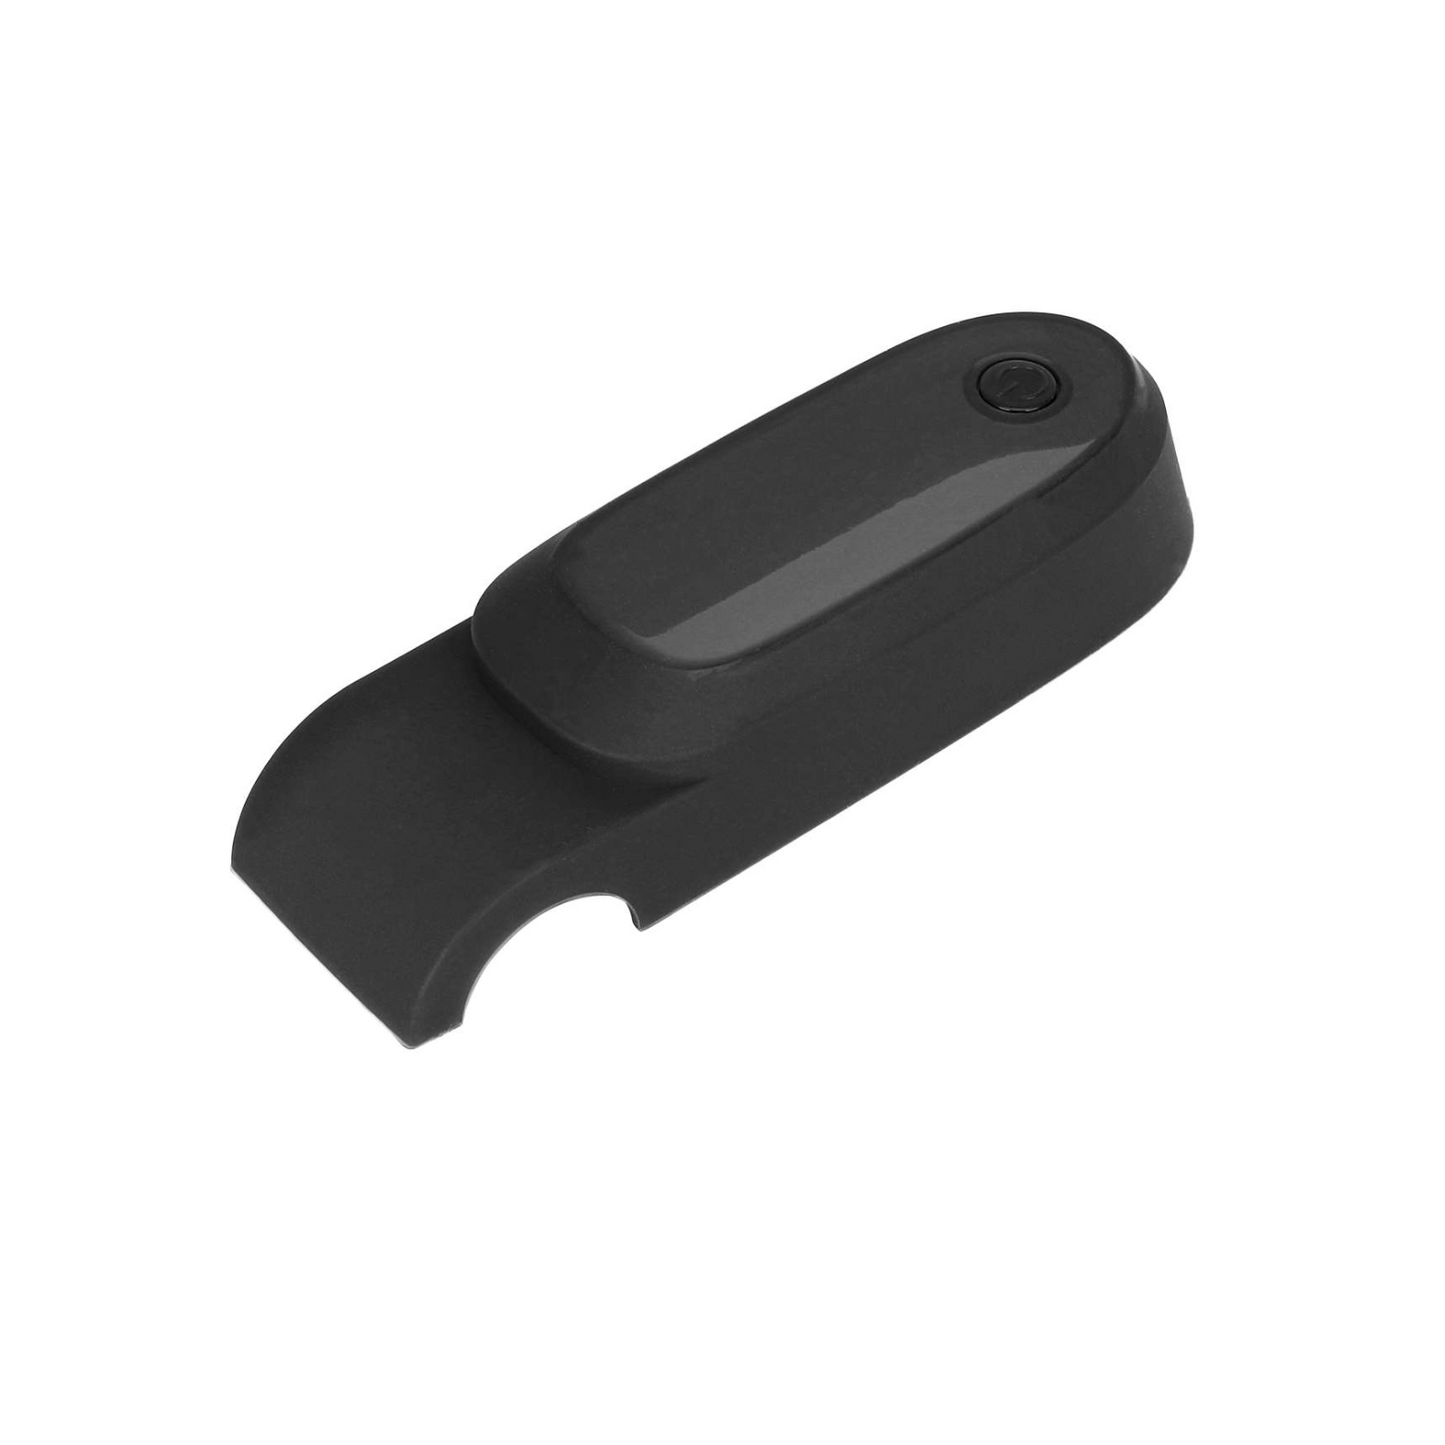 Silicone Cover Dashboard Protection for Ninebot Segway F20 F25 F30 F40